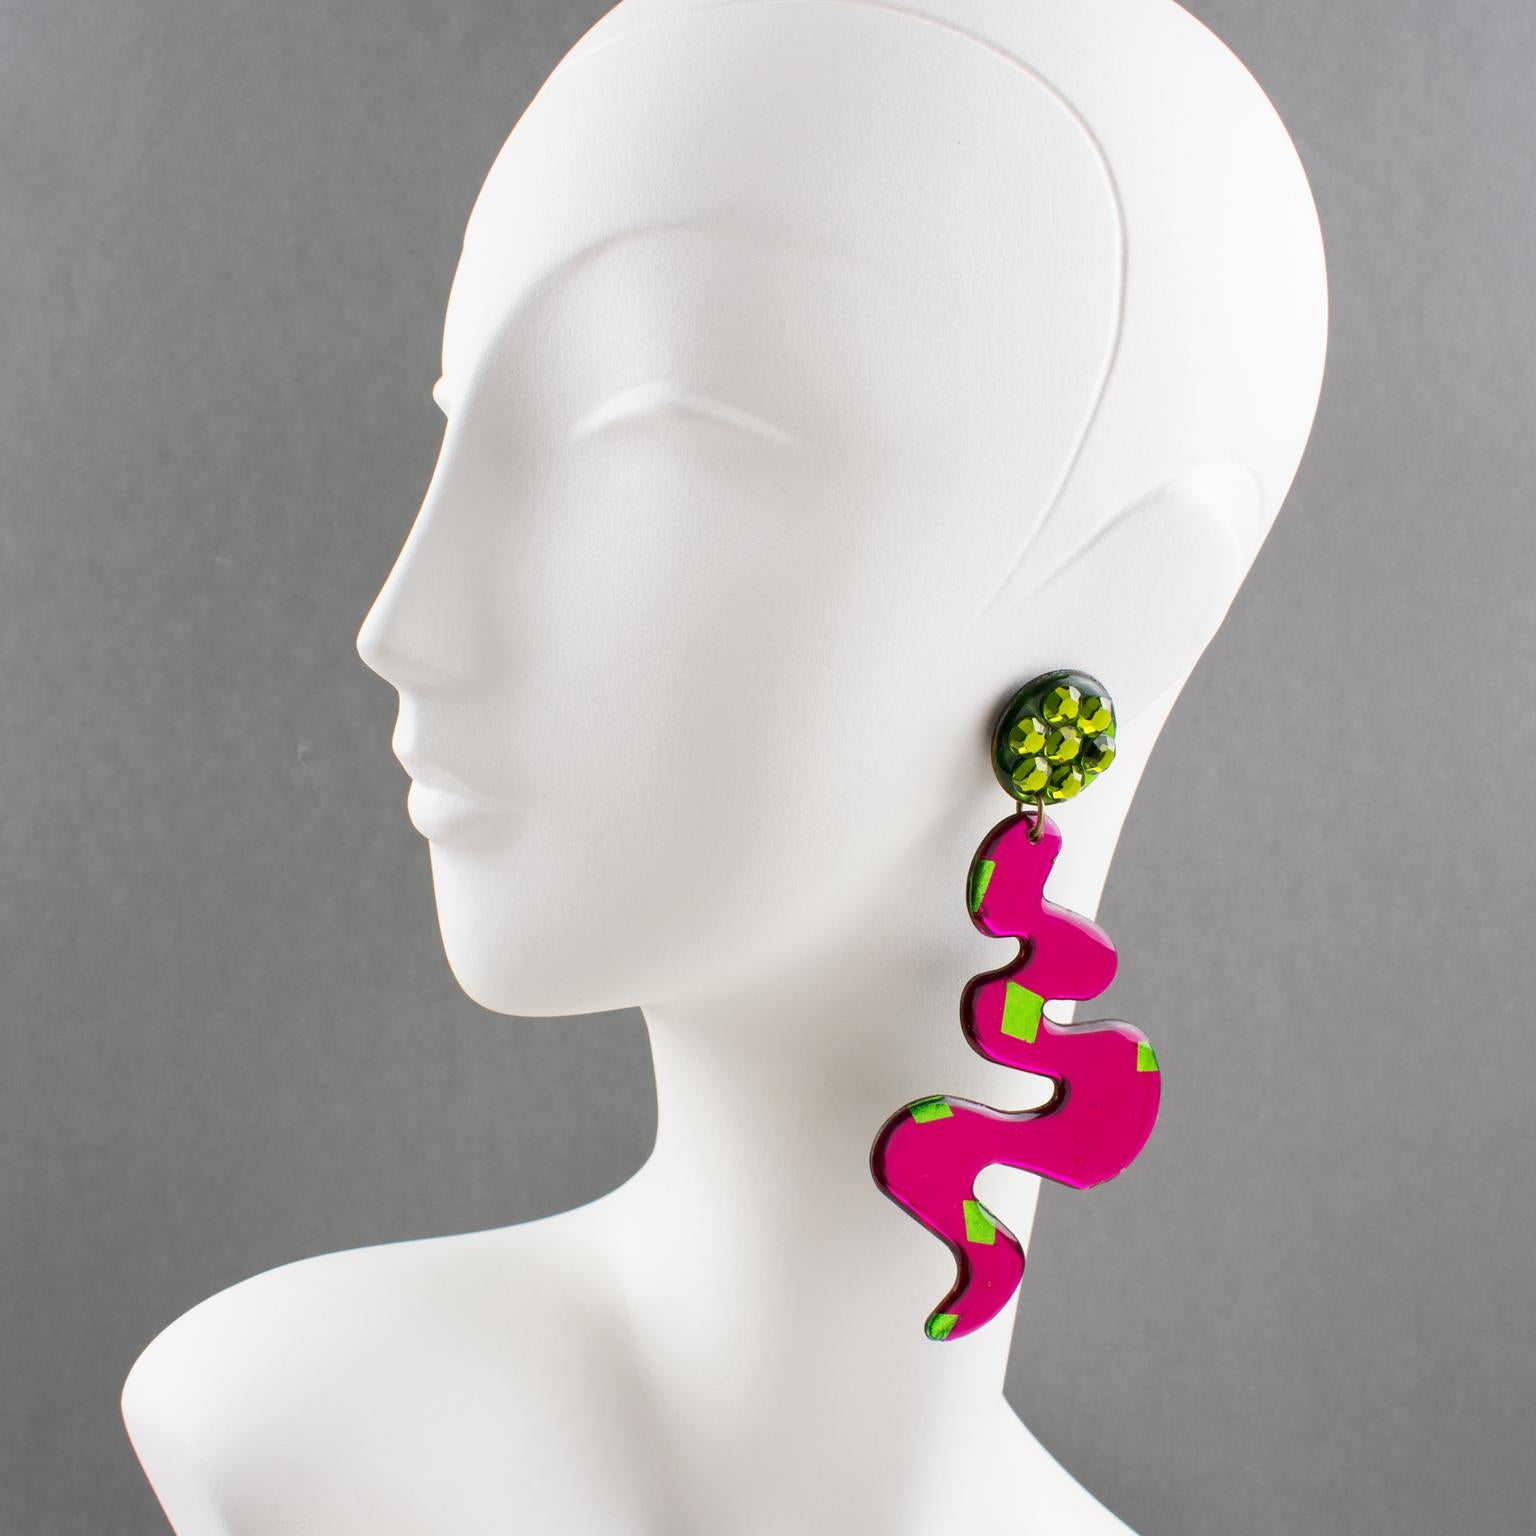 Handsome Italian Lucite or resin dangling clip-on earrings. Features an oversized chandelier shape with a freeform zig-zag design in hot pink and pistachio green colors. The colors have a mirrored textured pattern on a black background. Clip